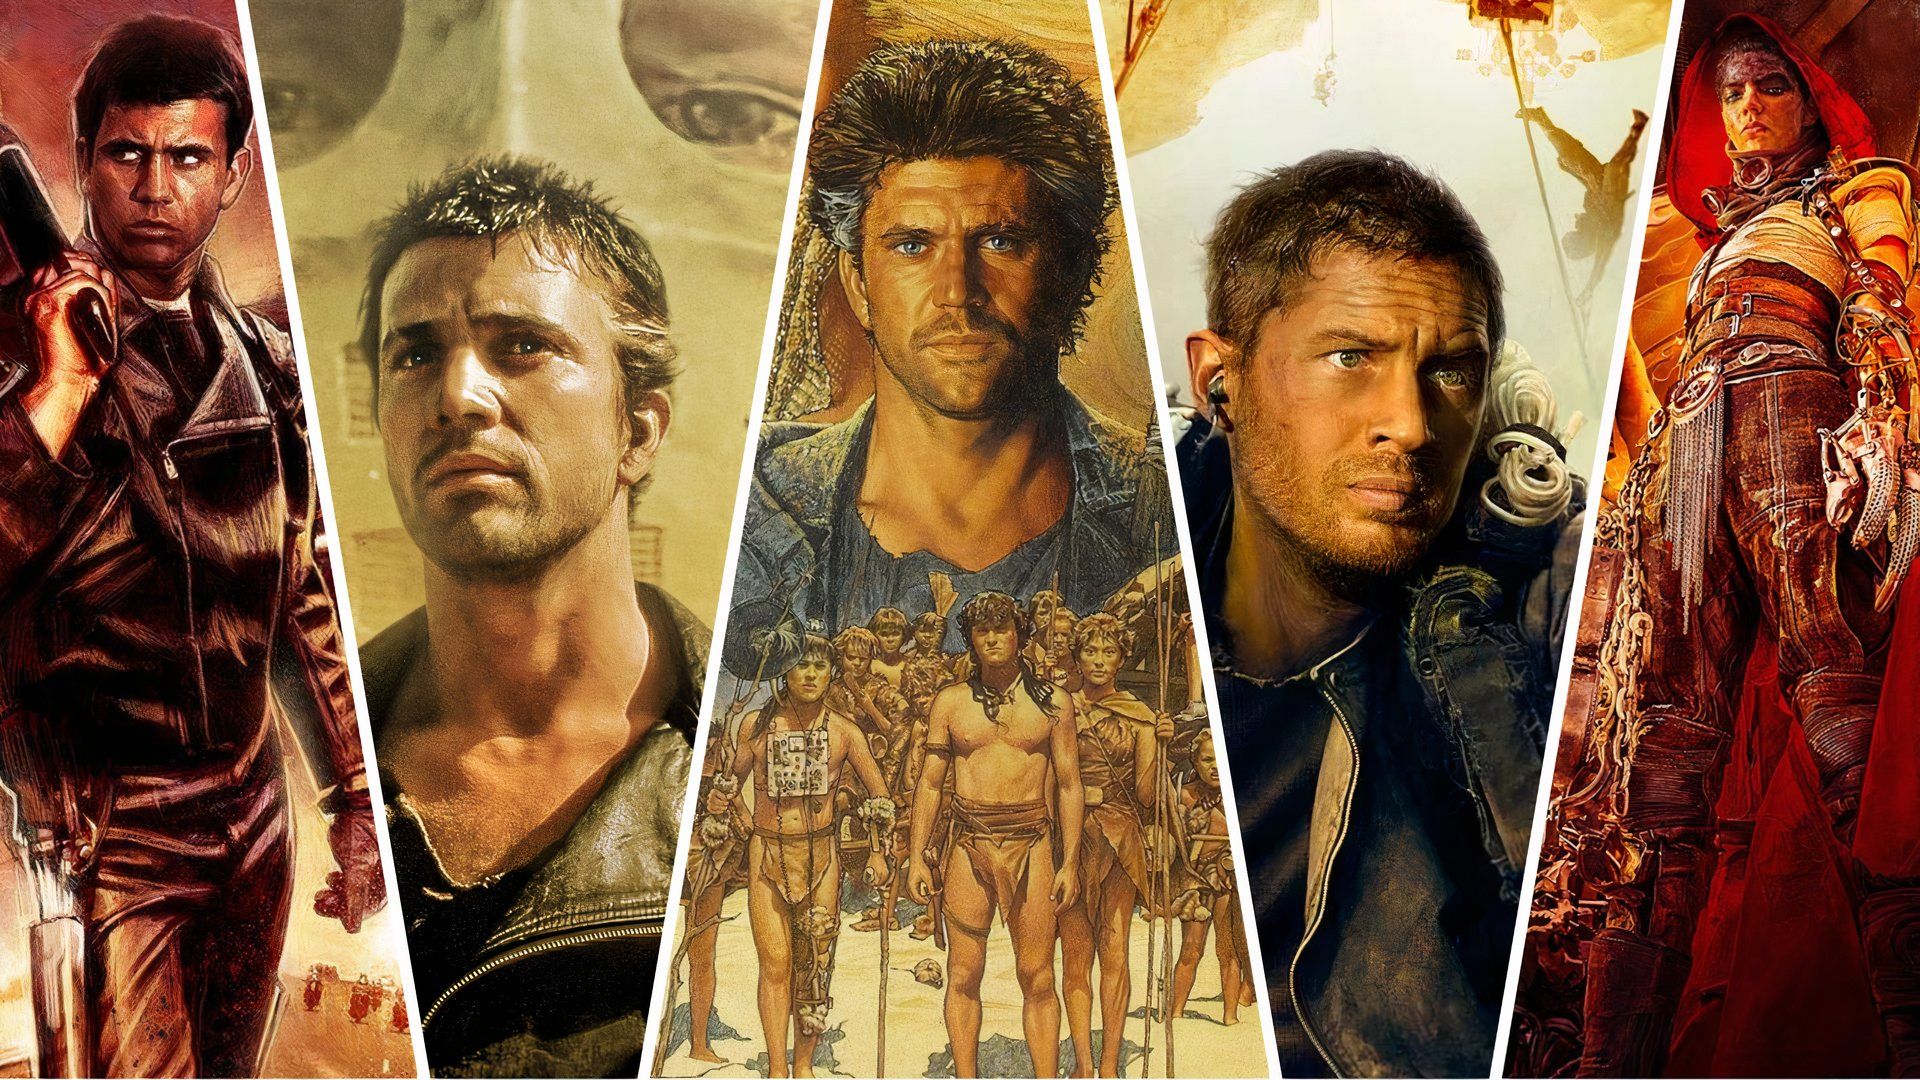 An edited of different Mad Max movies including Beyond Thunderdome, Fury Road, and Furiosa